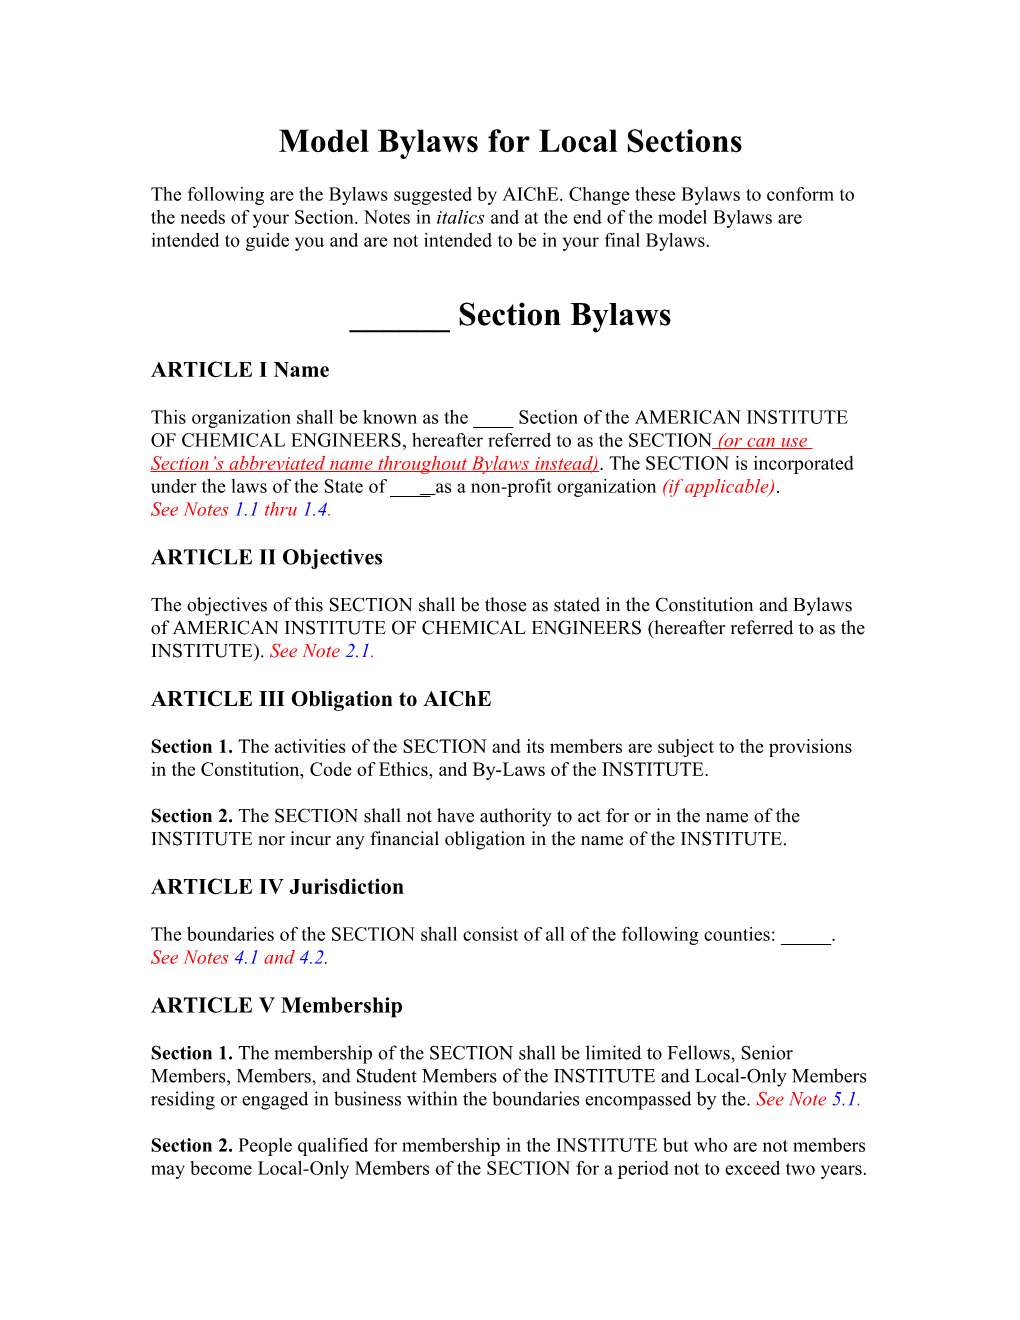 Model Bylaws for Local Sections